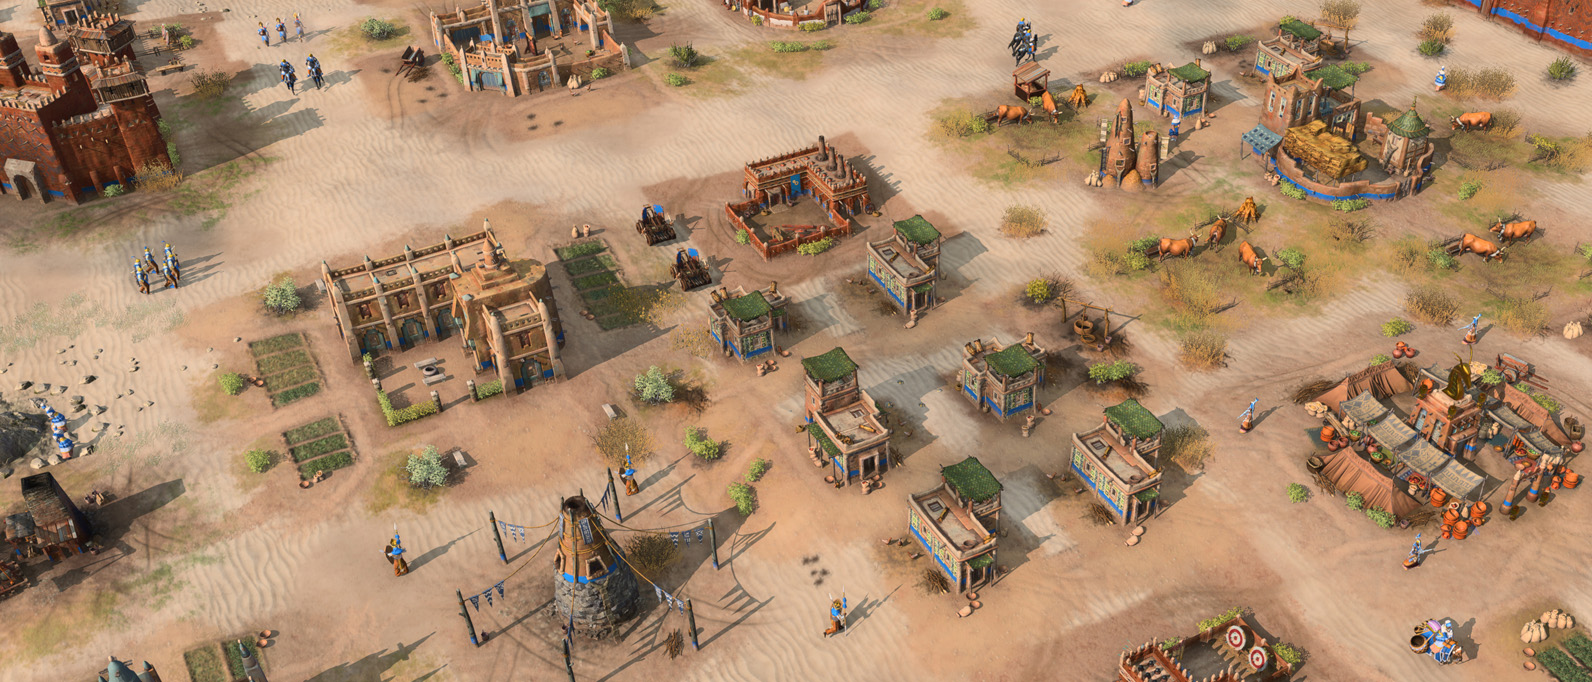 Age of Empires 4 is free this week!